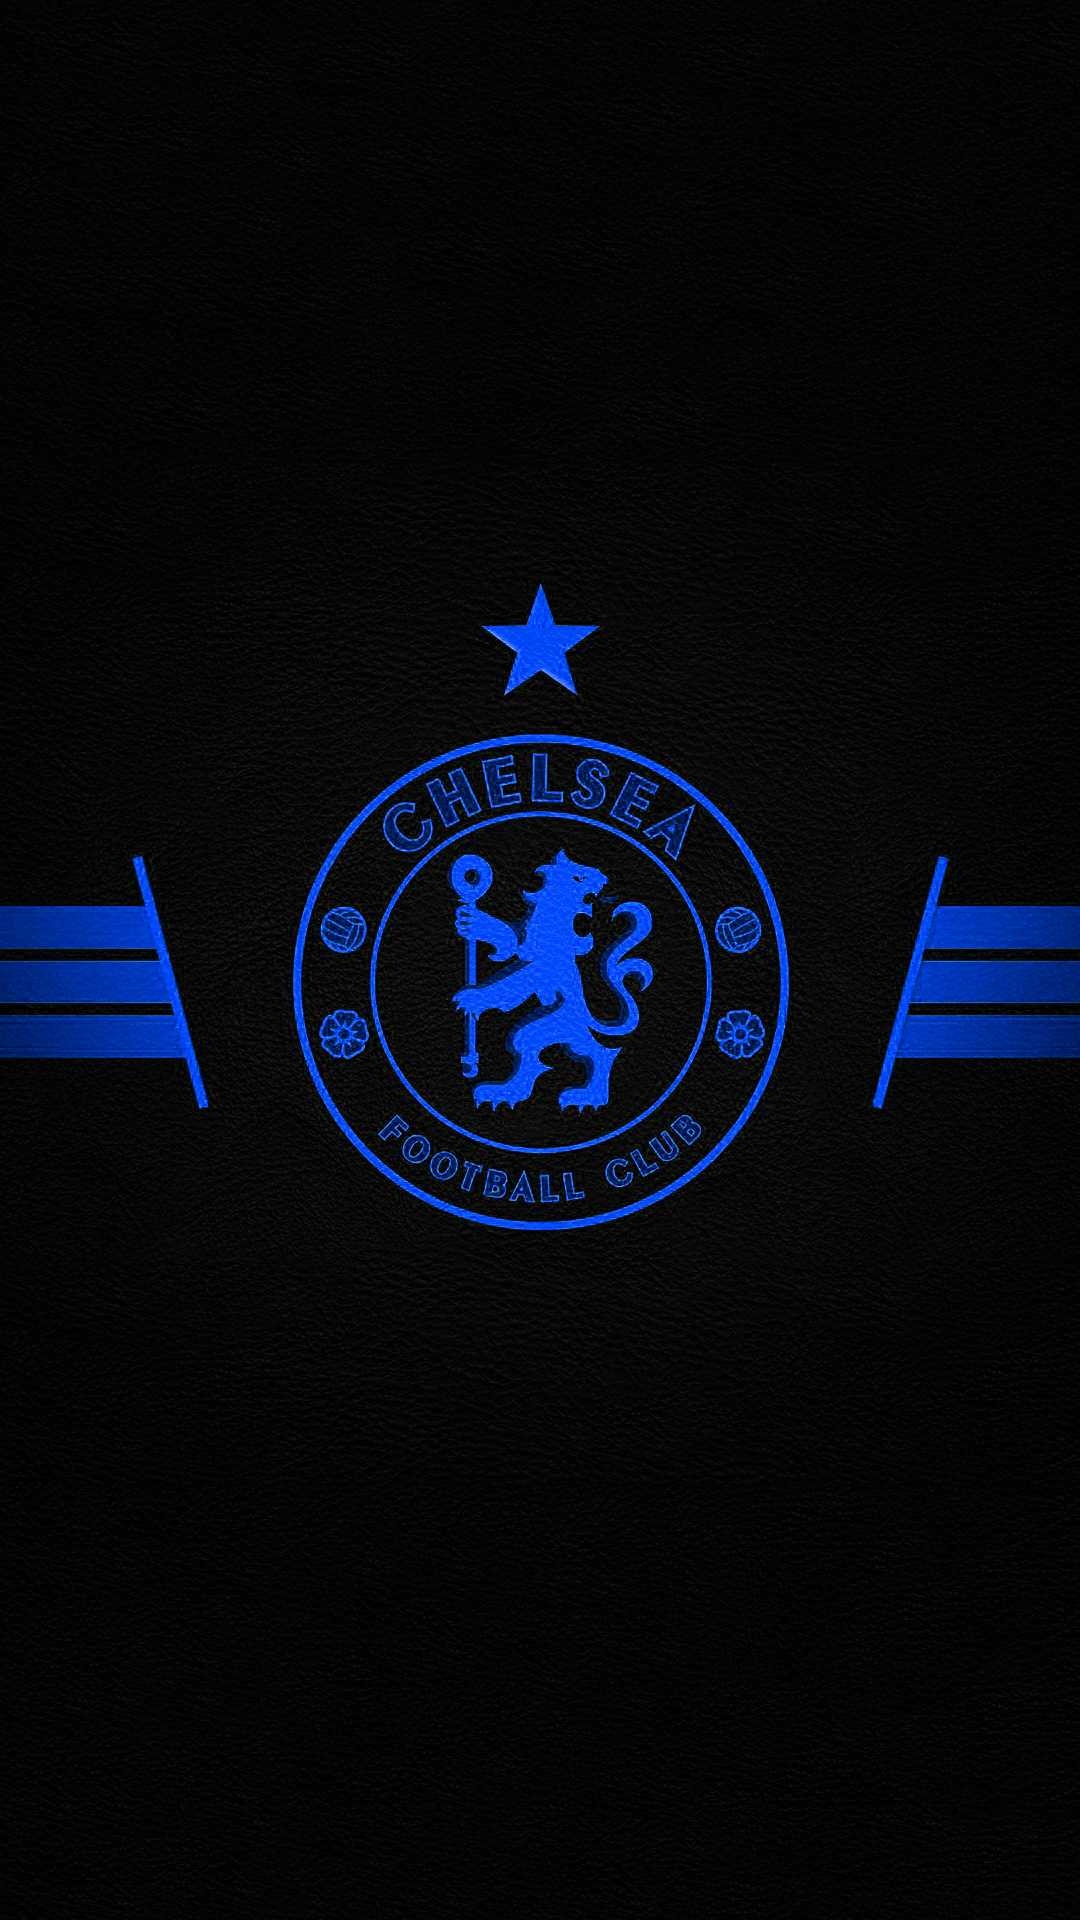 Chelsea: FC with a strong presence in the English top flight, won numerous trophies over the years. 1080x1920 Full HD Background.